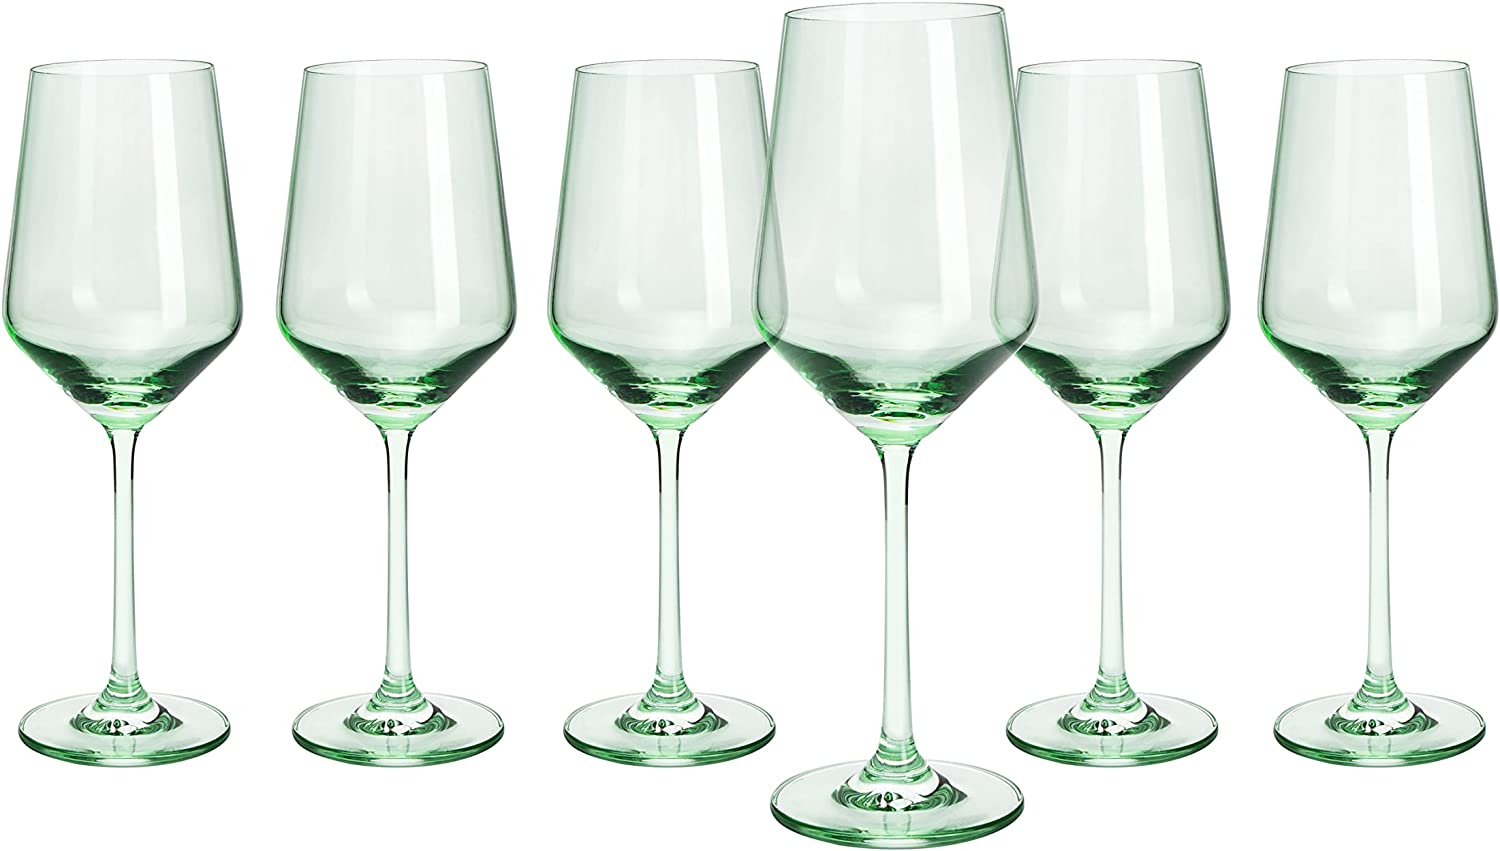 Mint Green Colored Stemless Wine Glasses, Set of 6